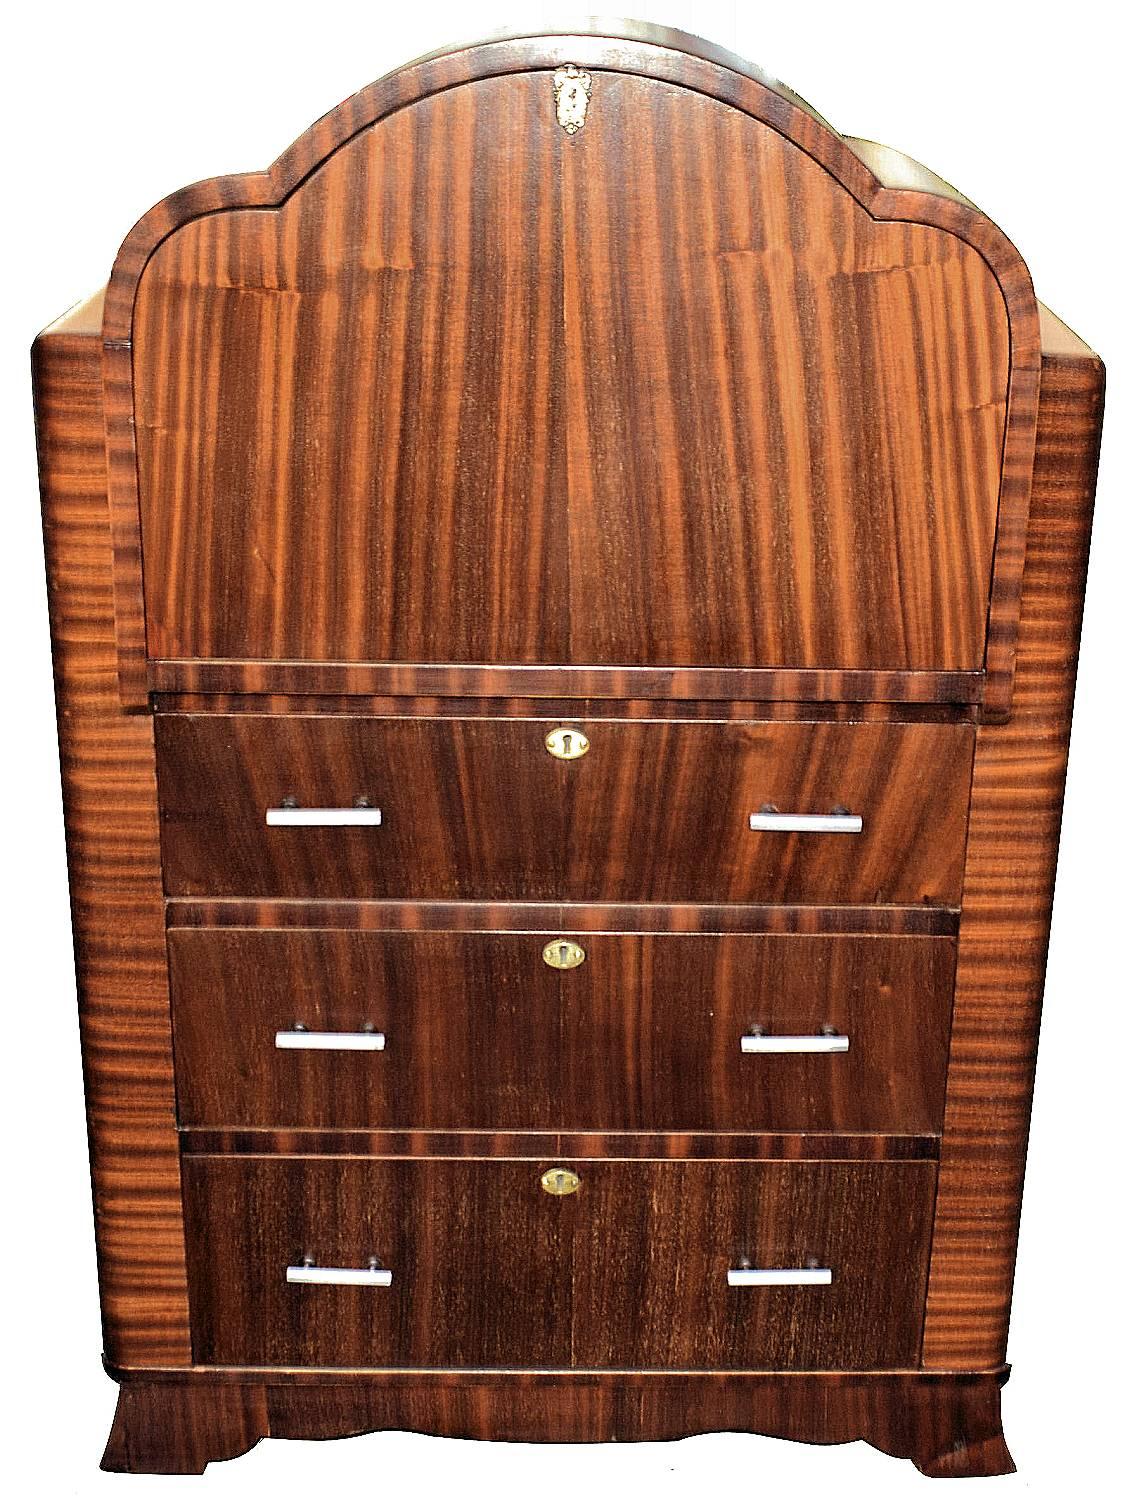 This is a fantastic 1930s Art Deco bureau of small proportions, a really superb piece of furniture. Veneered in a lovely mahogany 'Flame Grain' with three drawers to the base and a pull down top reveals a desk area with slots for envelopes and a